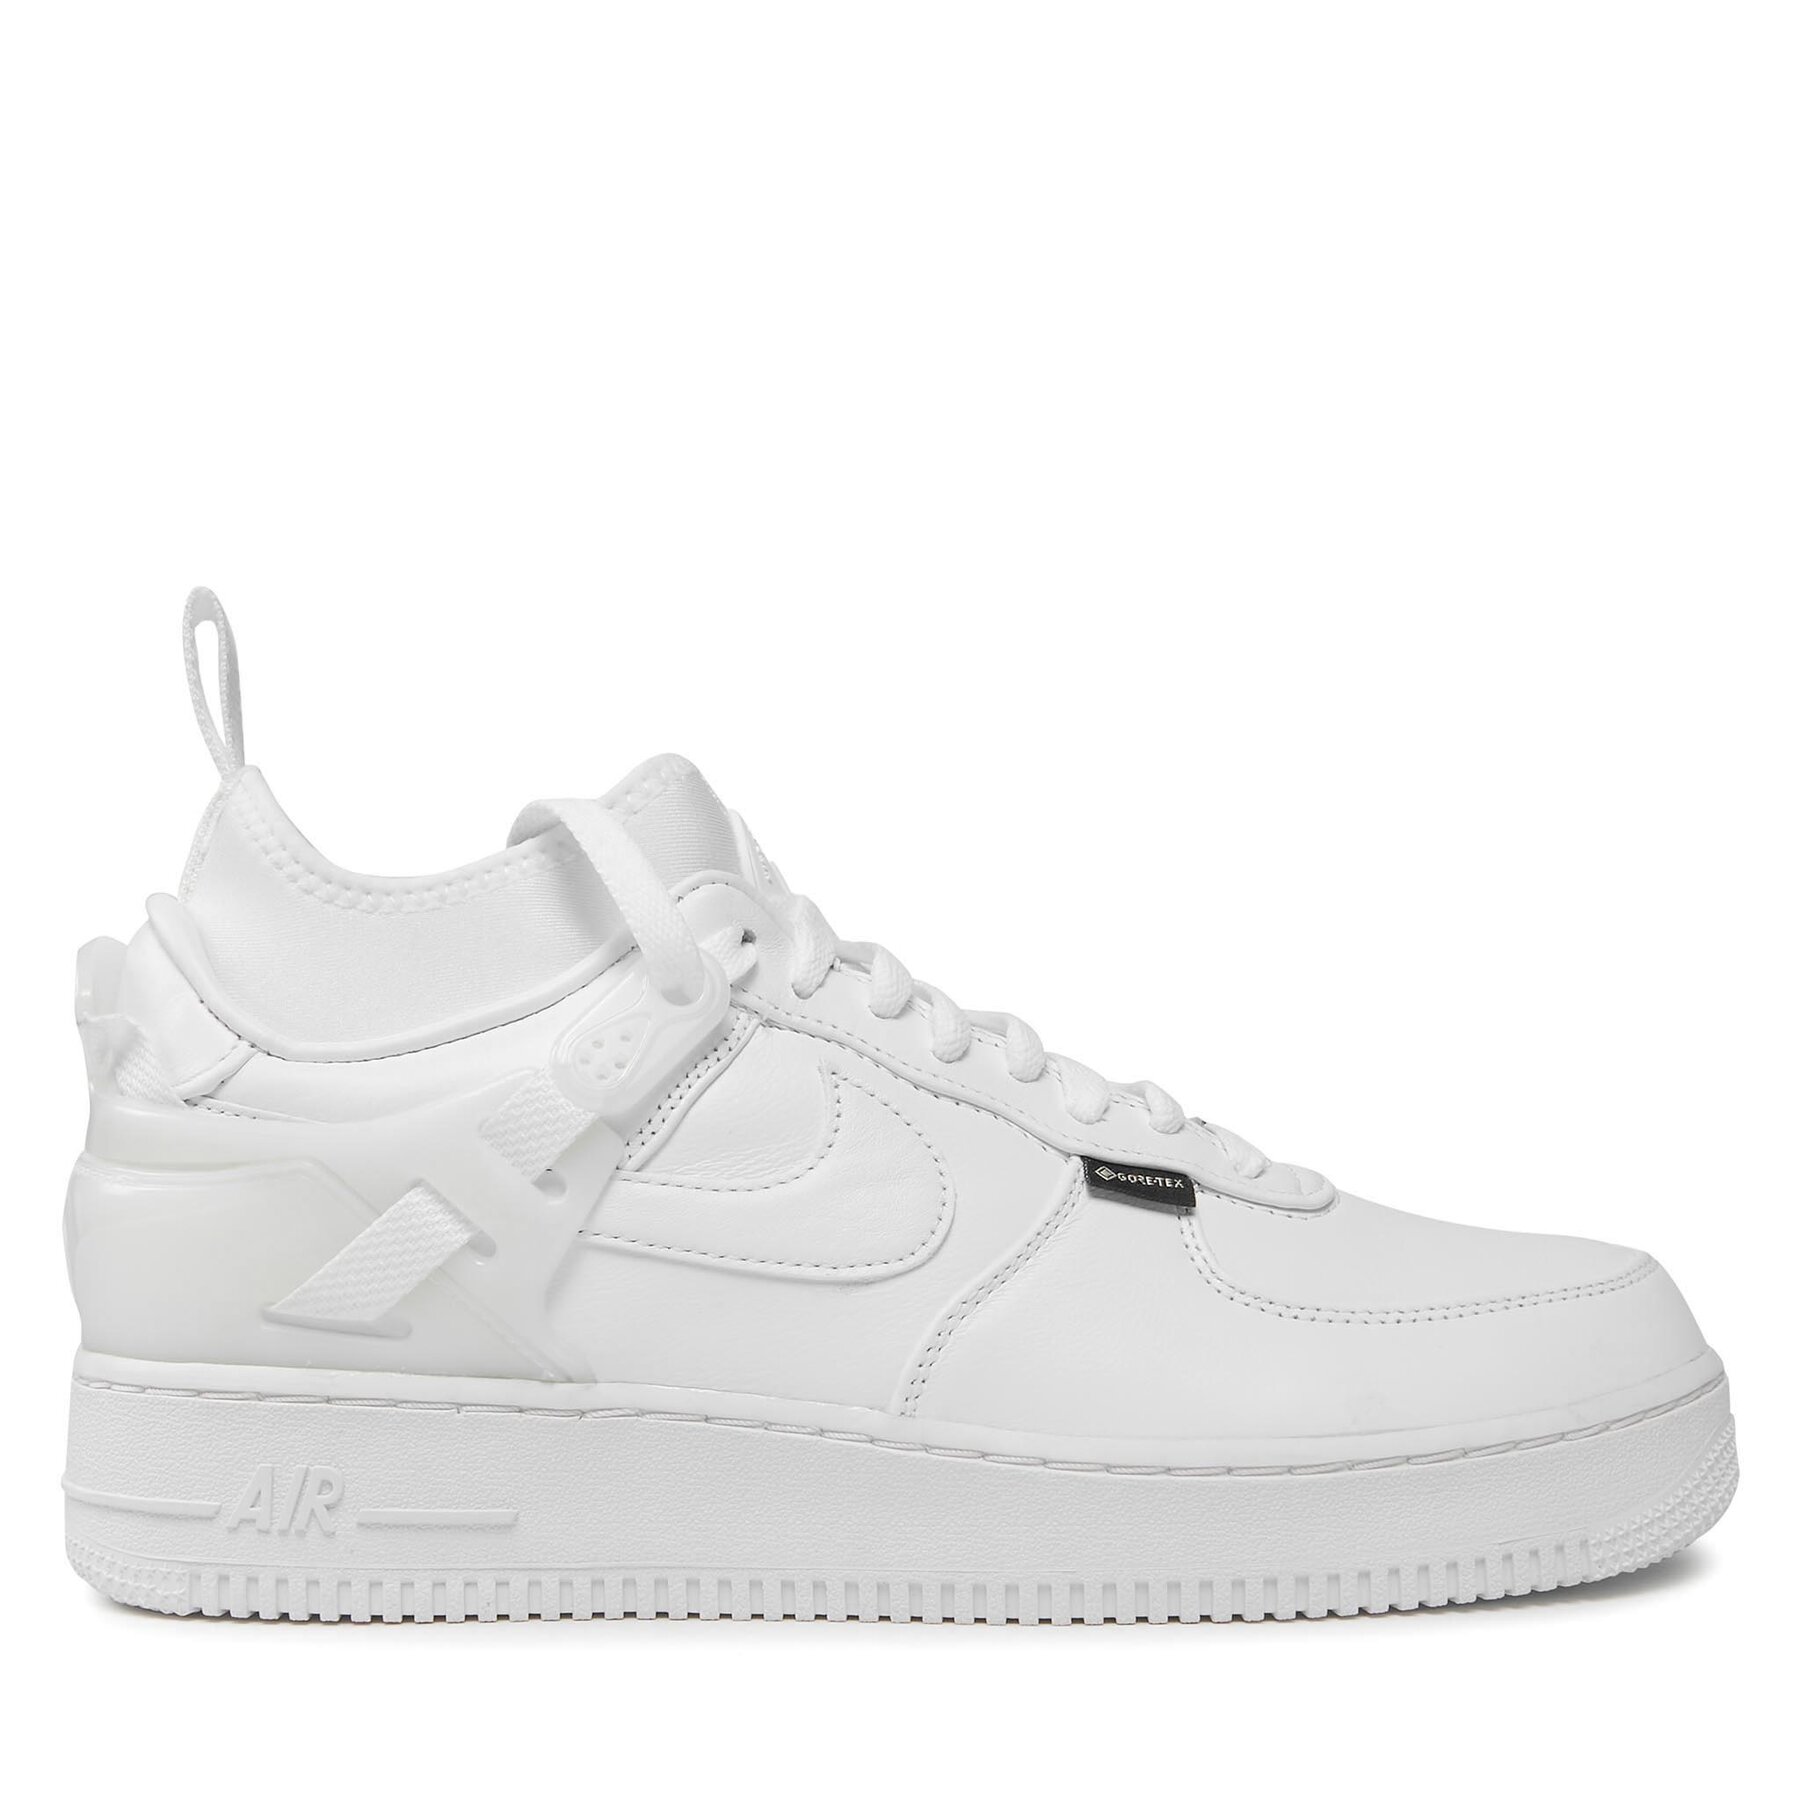 Sneakers Nike Air Force 1 Low Sp Uc GORE-TEX DQ7558 101 Blanc